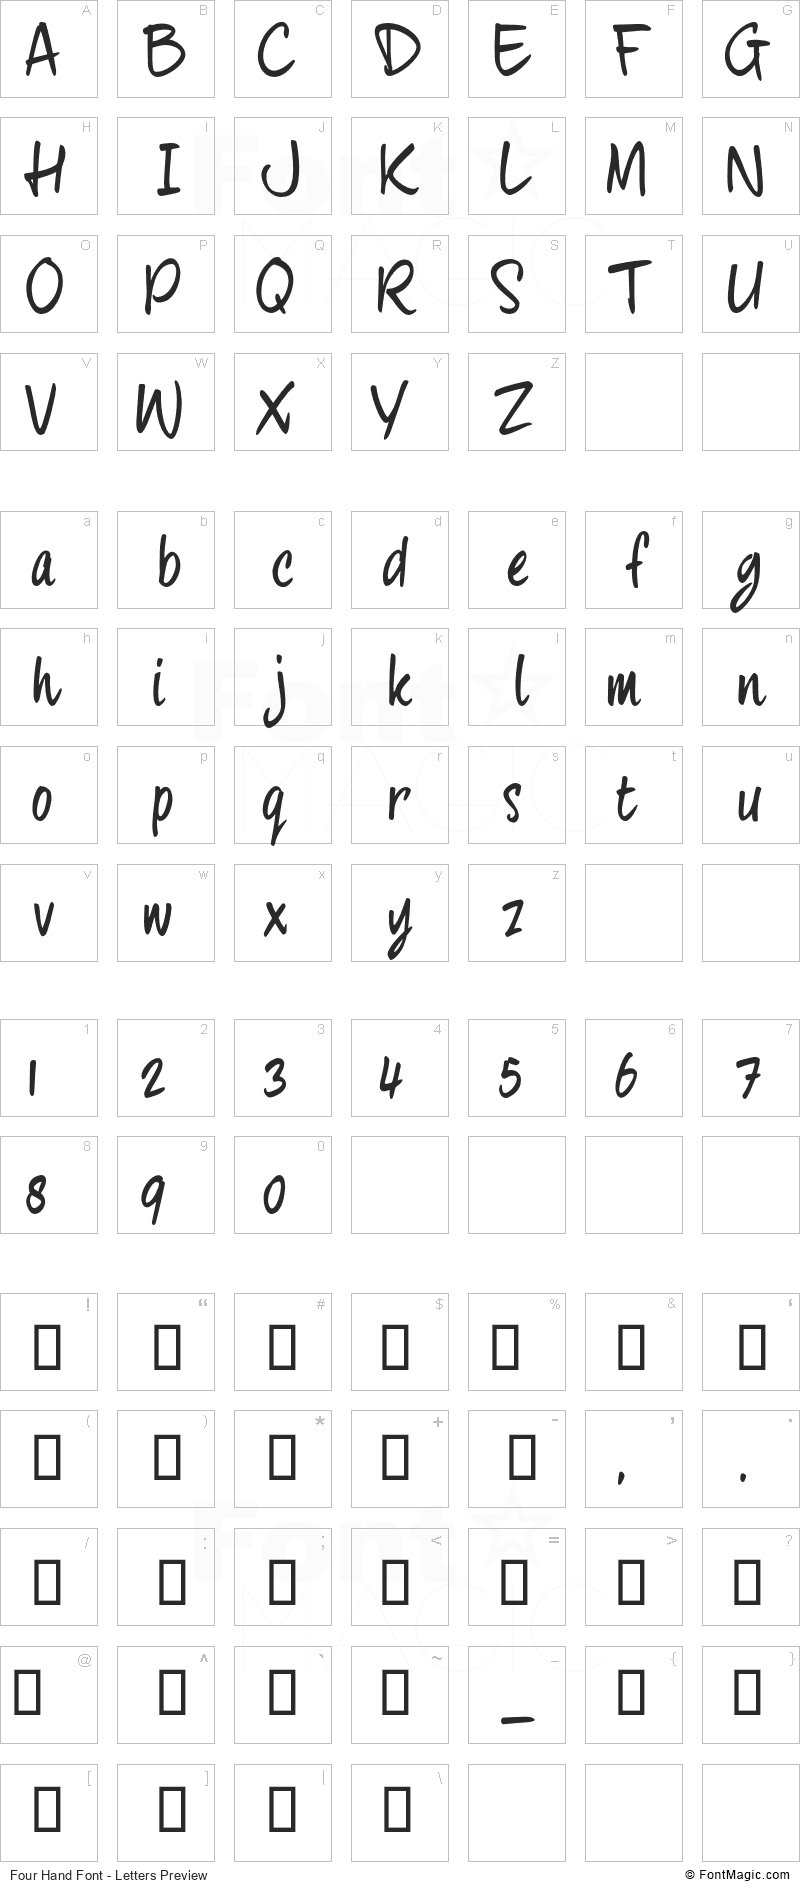 Four Hand Font - All Latters Preview Chart